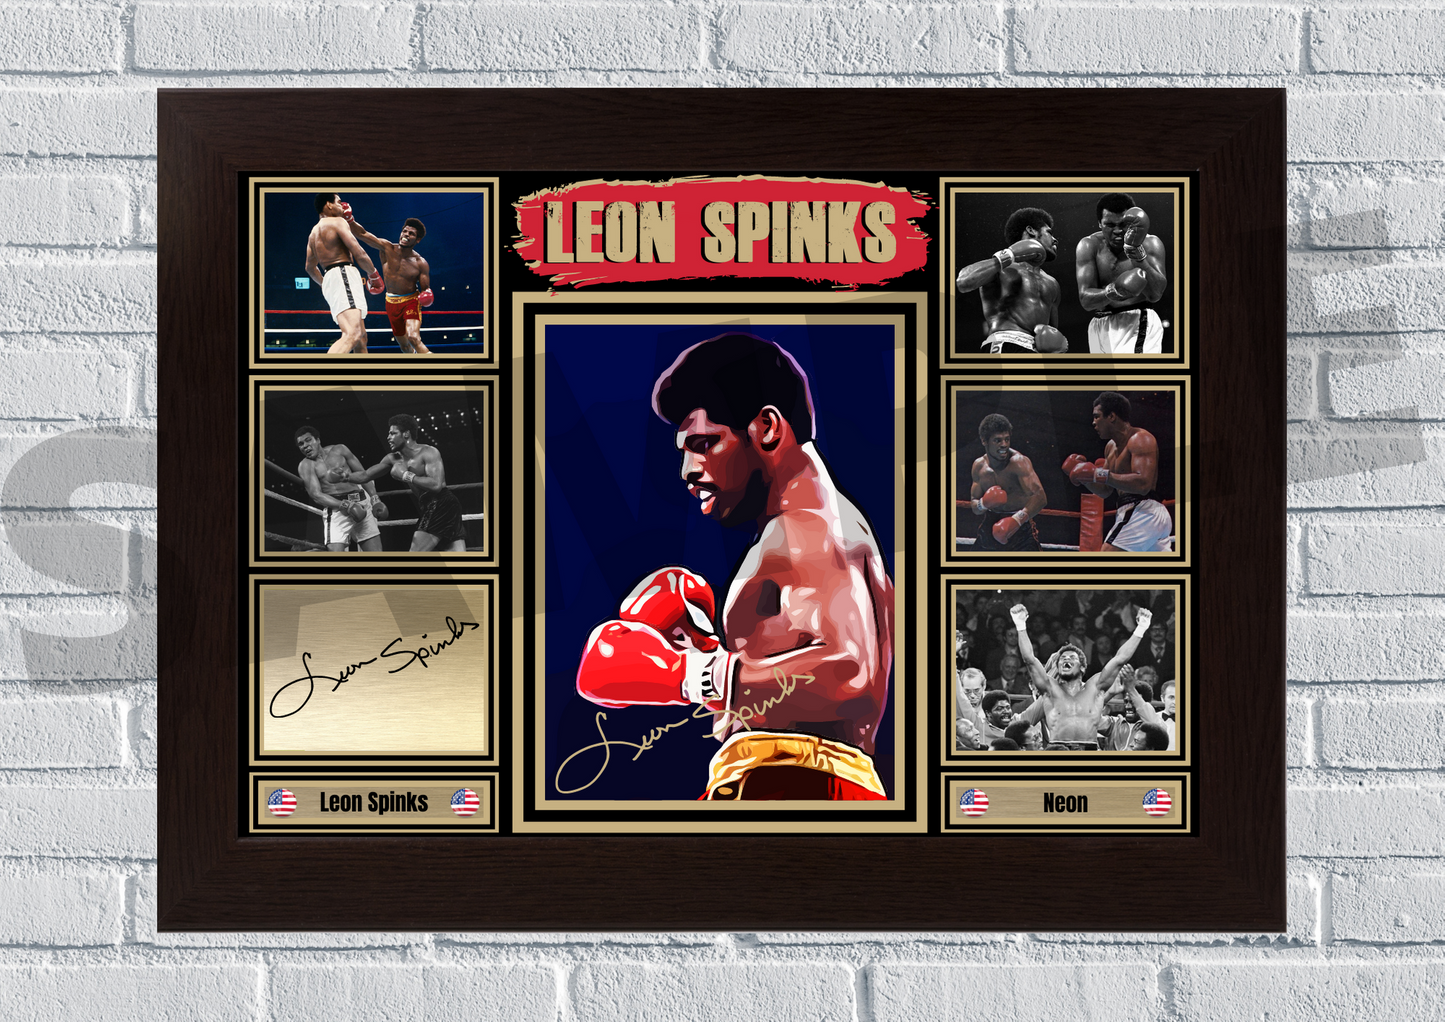 Leon Spinks (Boxing) #64 - Signed collectible/memorabilia/print